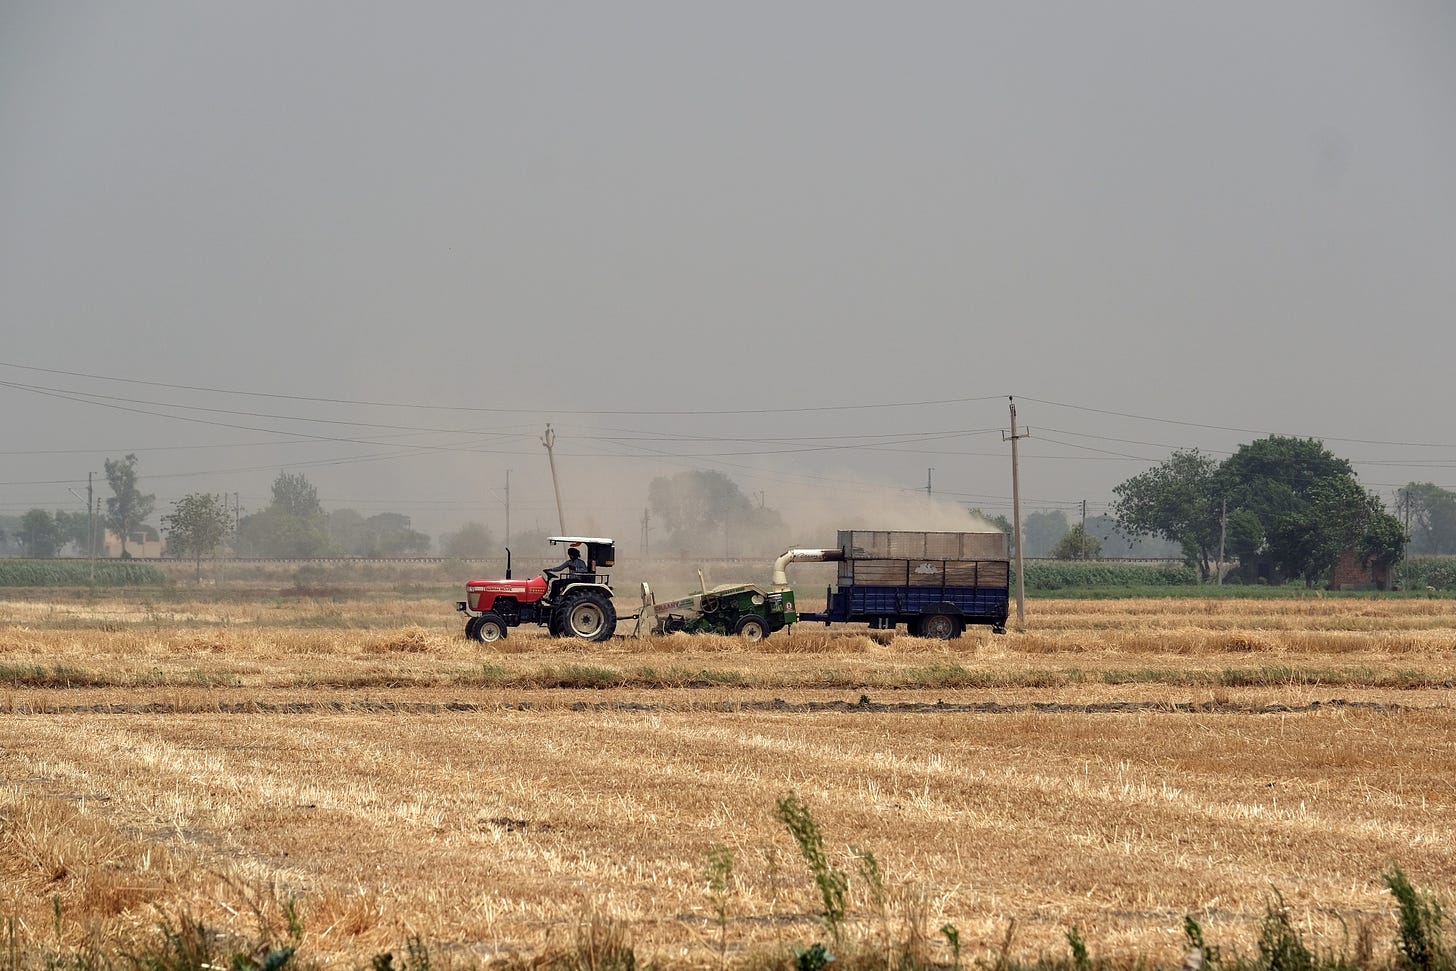 India&nbsp;experienced its hottest March on record, shriveling India’s wheat crop during a crucial growth period.